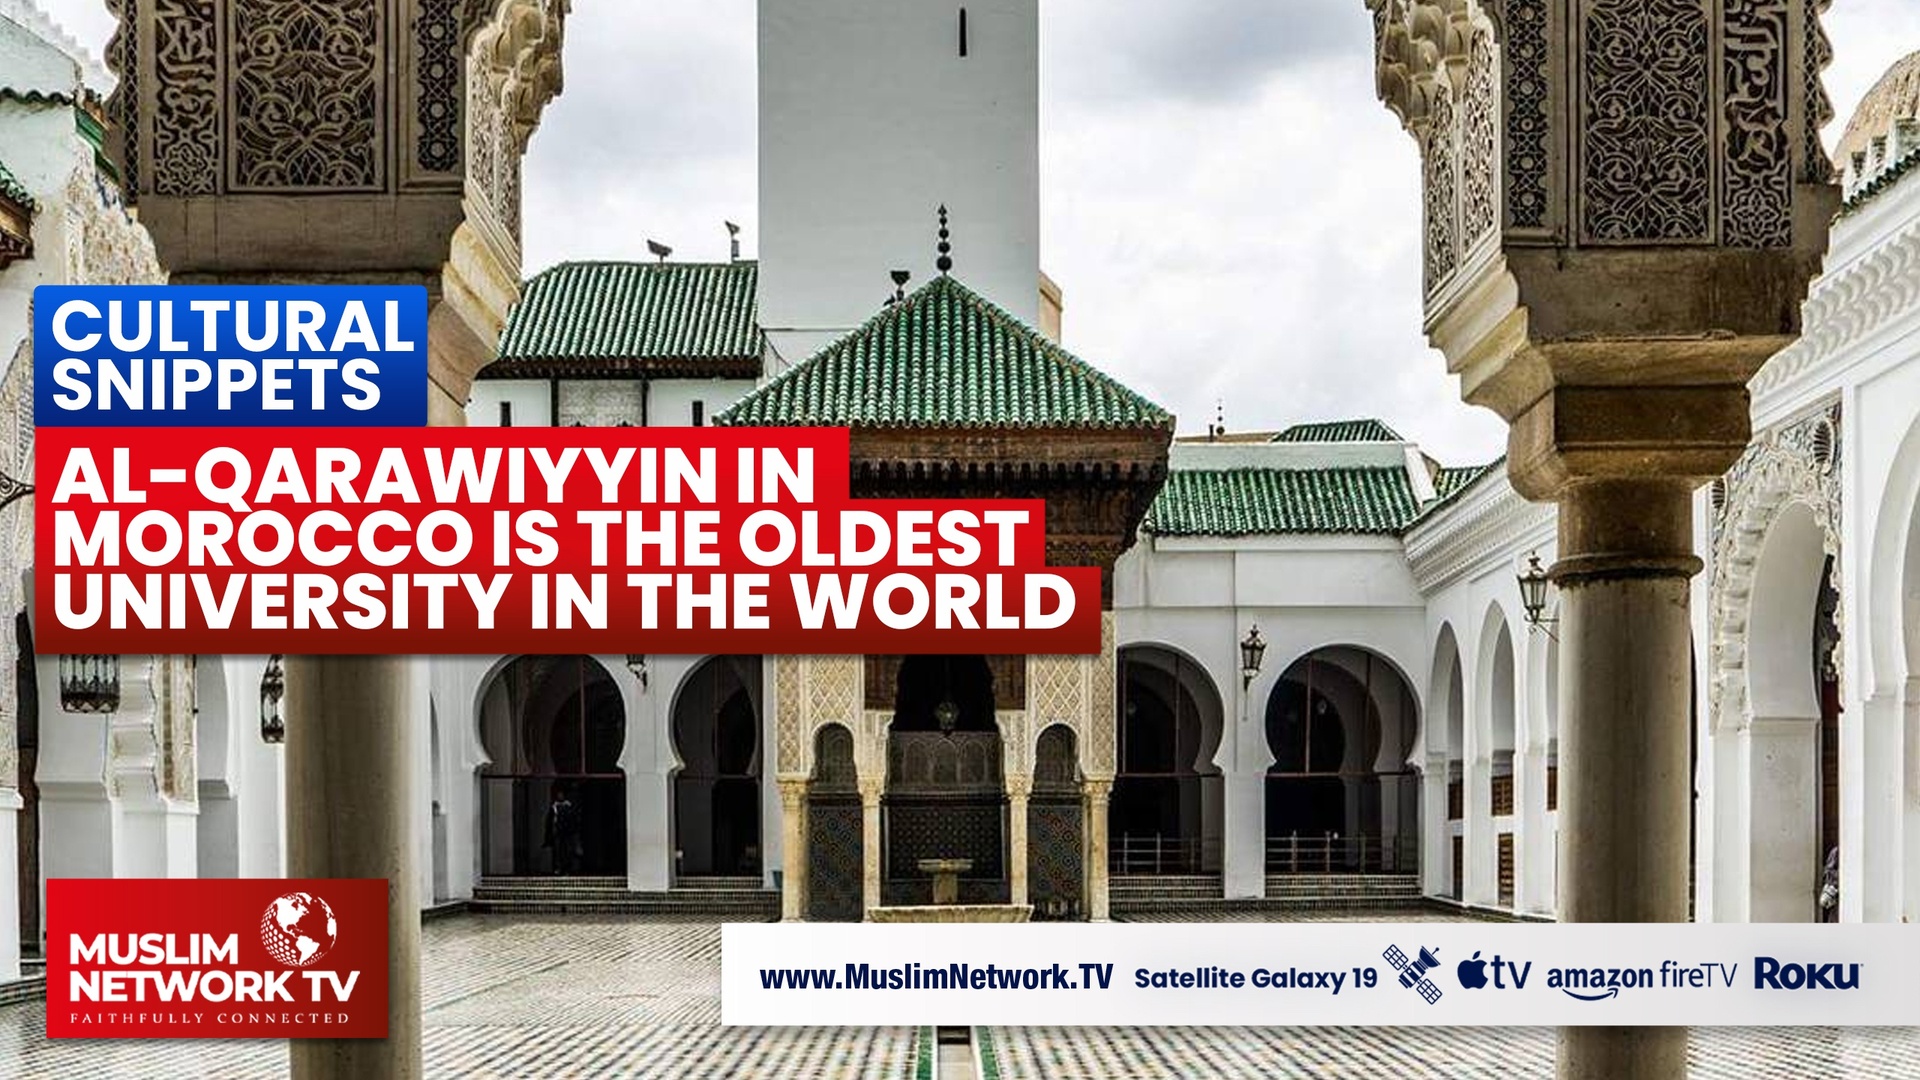 Al-Qarawiyyin in Morocco is the Oldest University in the World